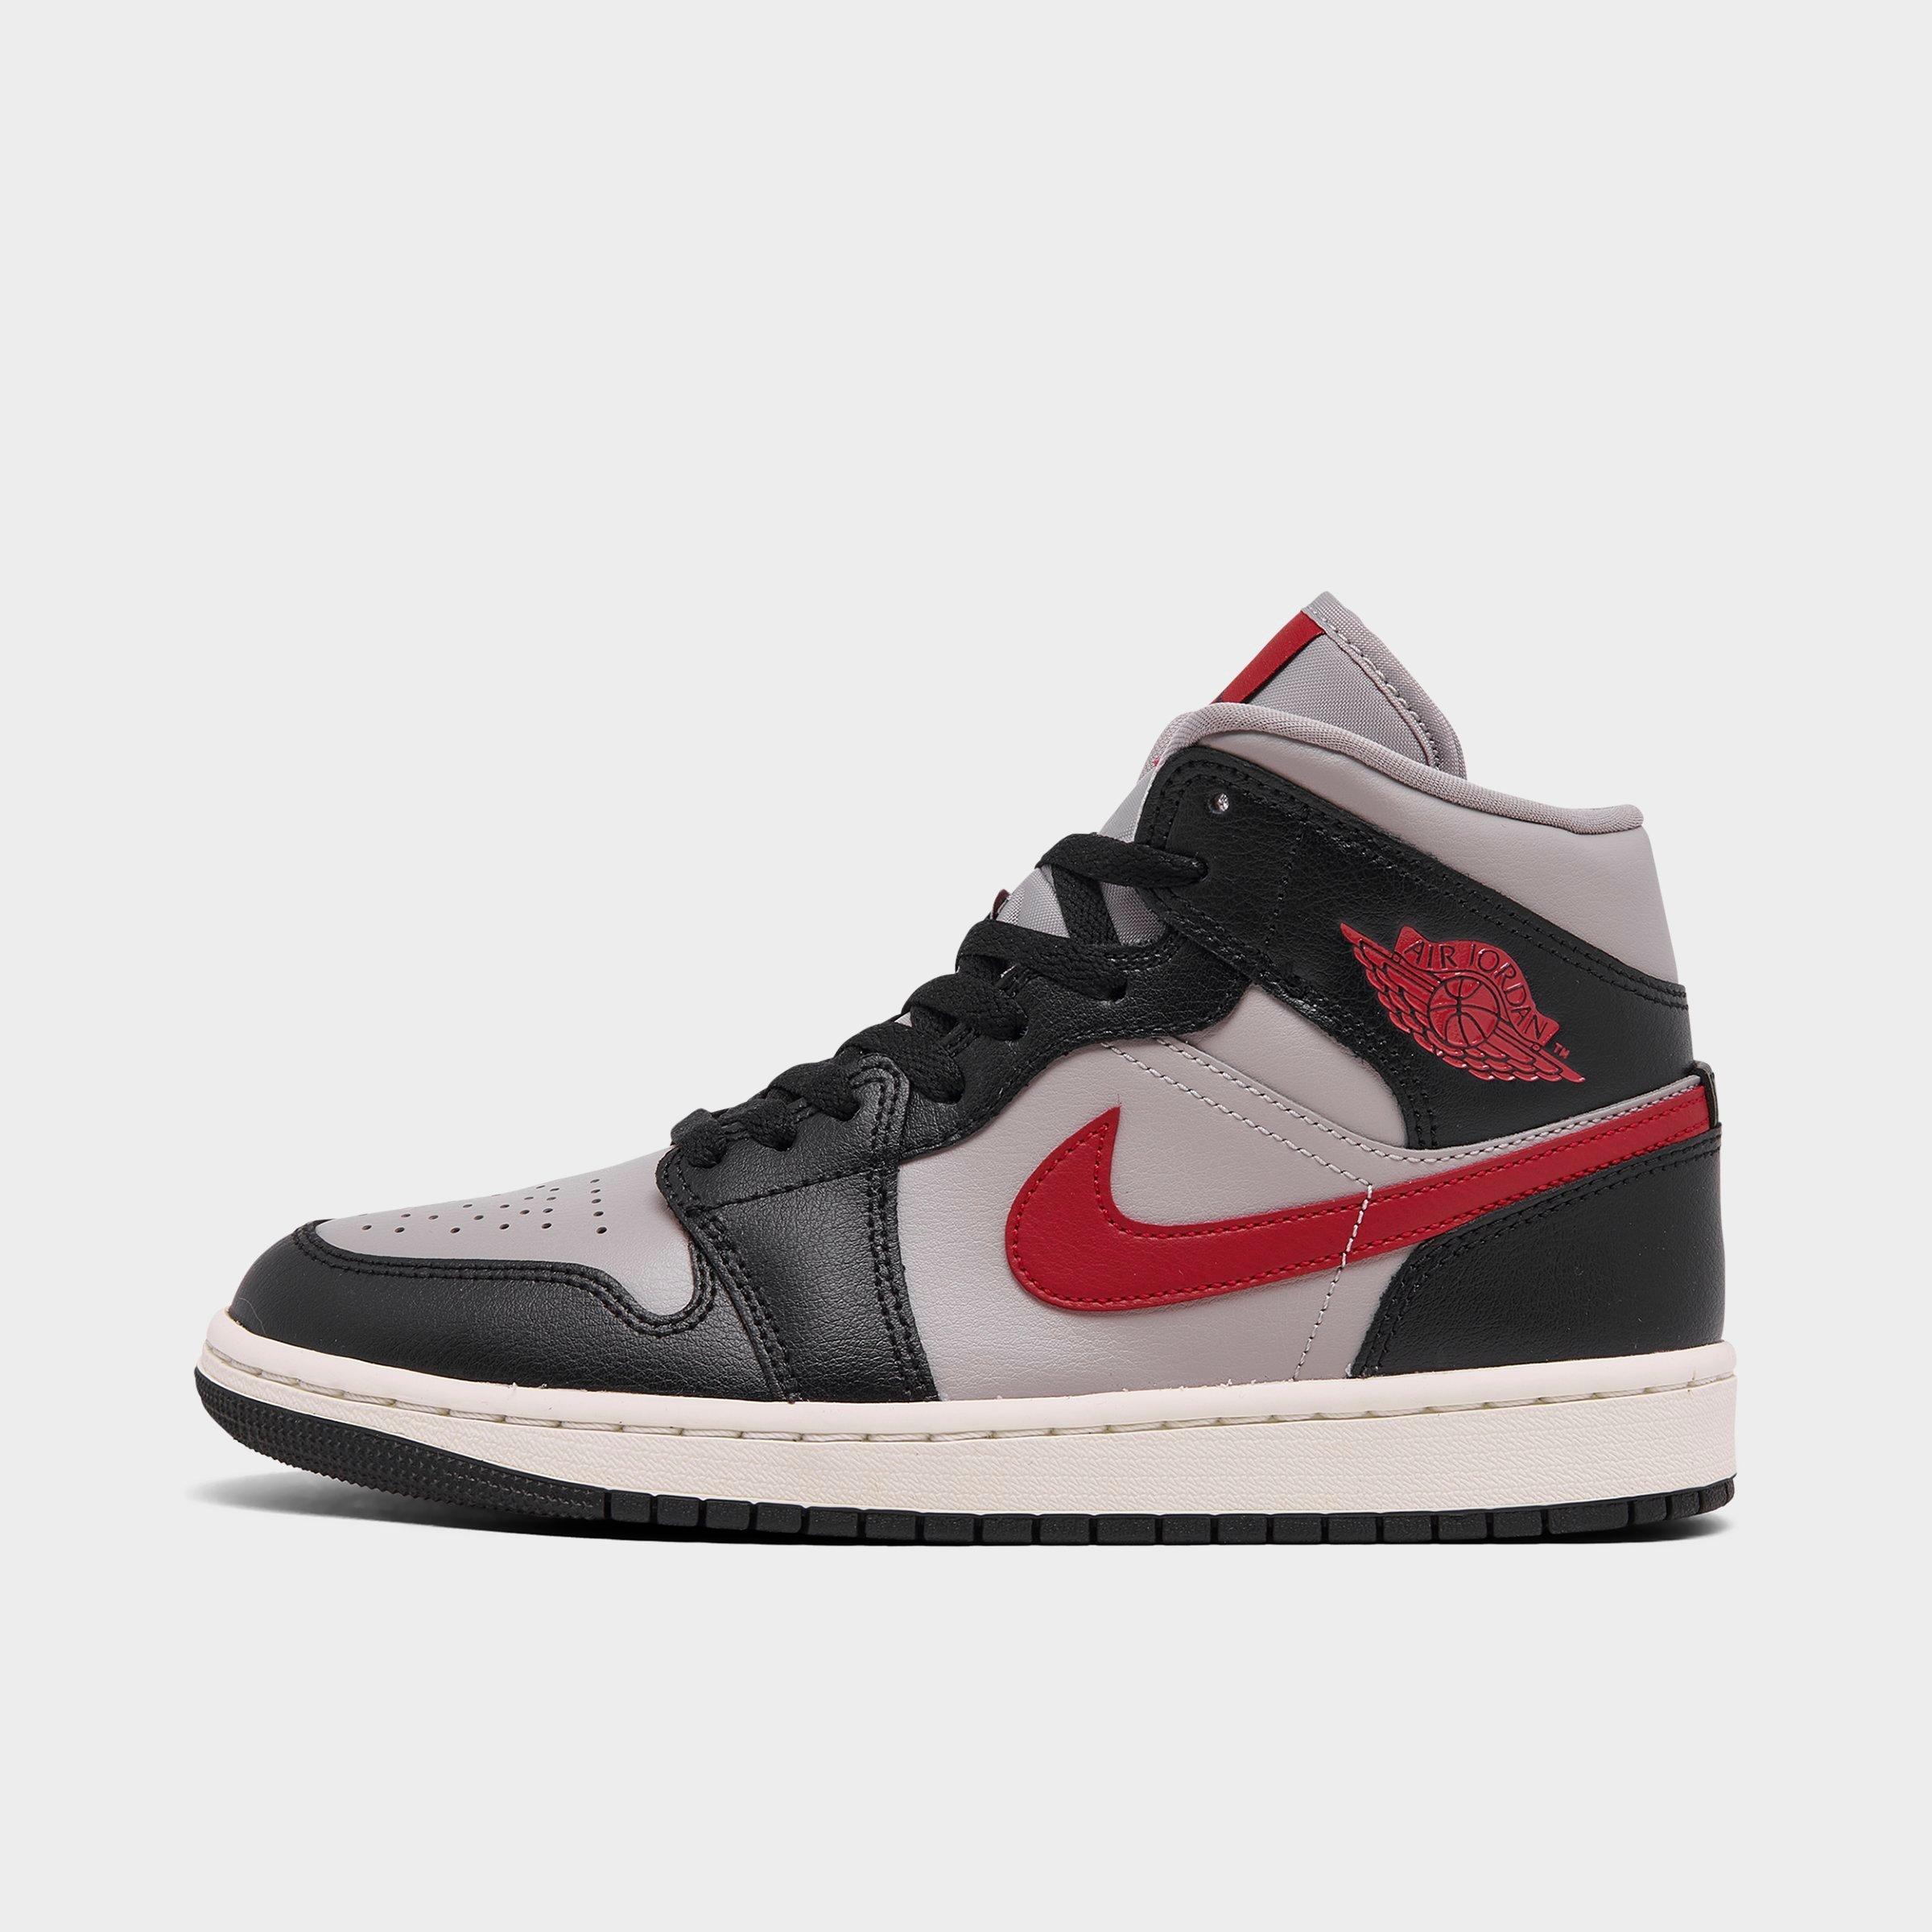 Nike Air Jordan 1 Mid Sneakers Black College Gray And Gym Red In Black/gym Red/college Grey/sail